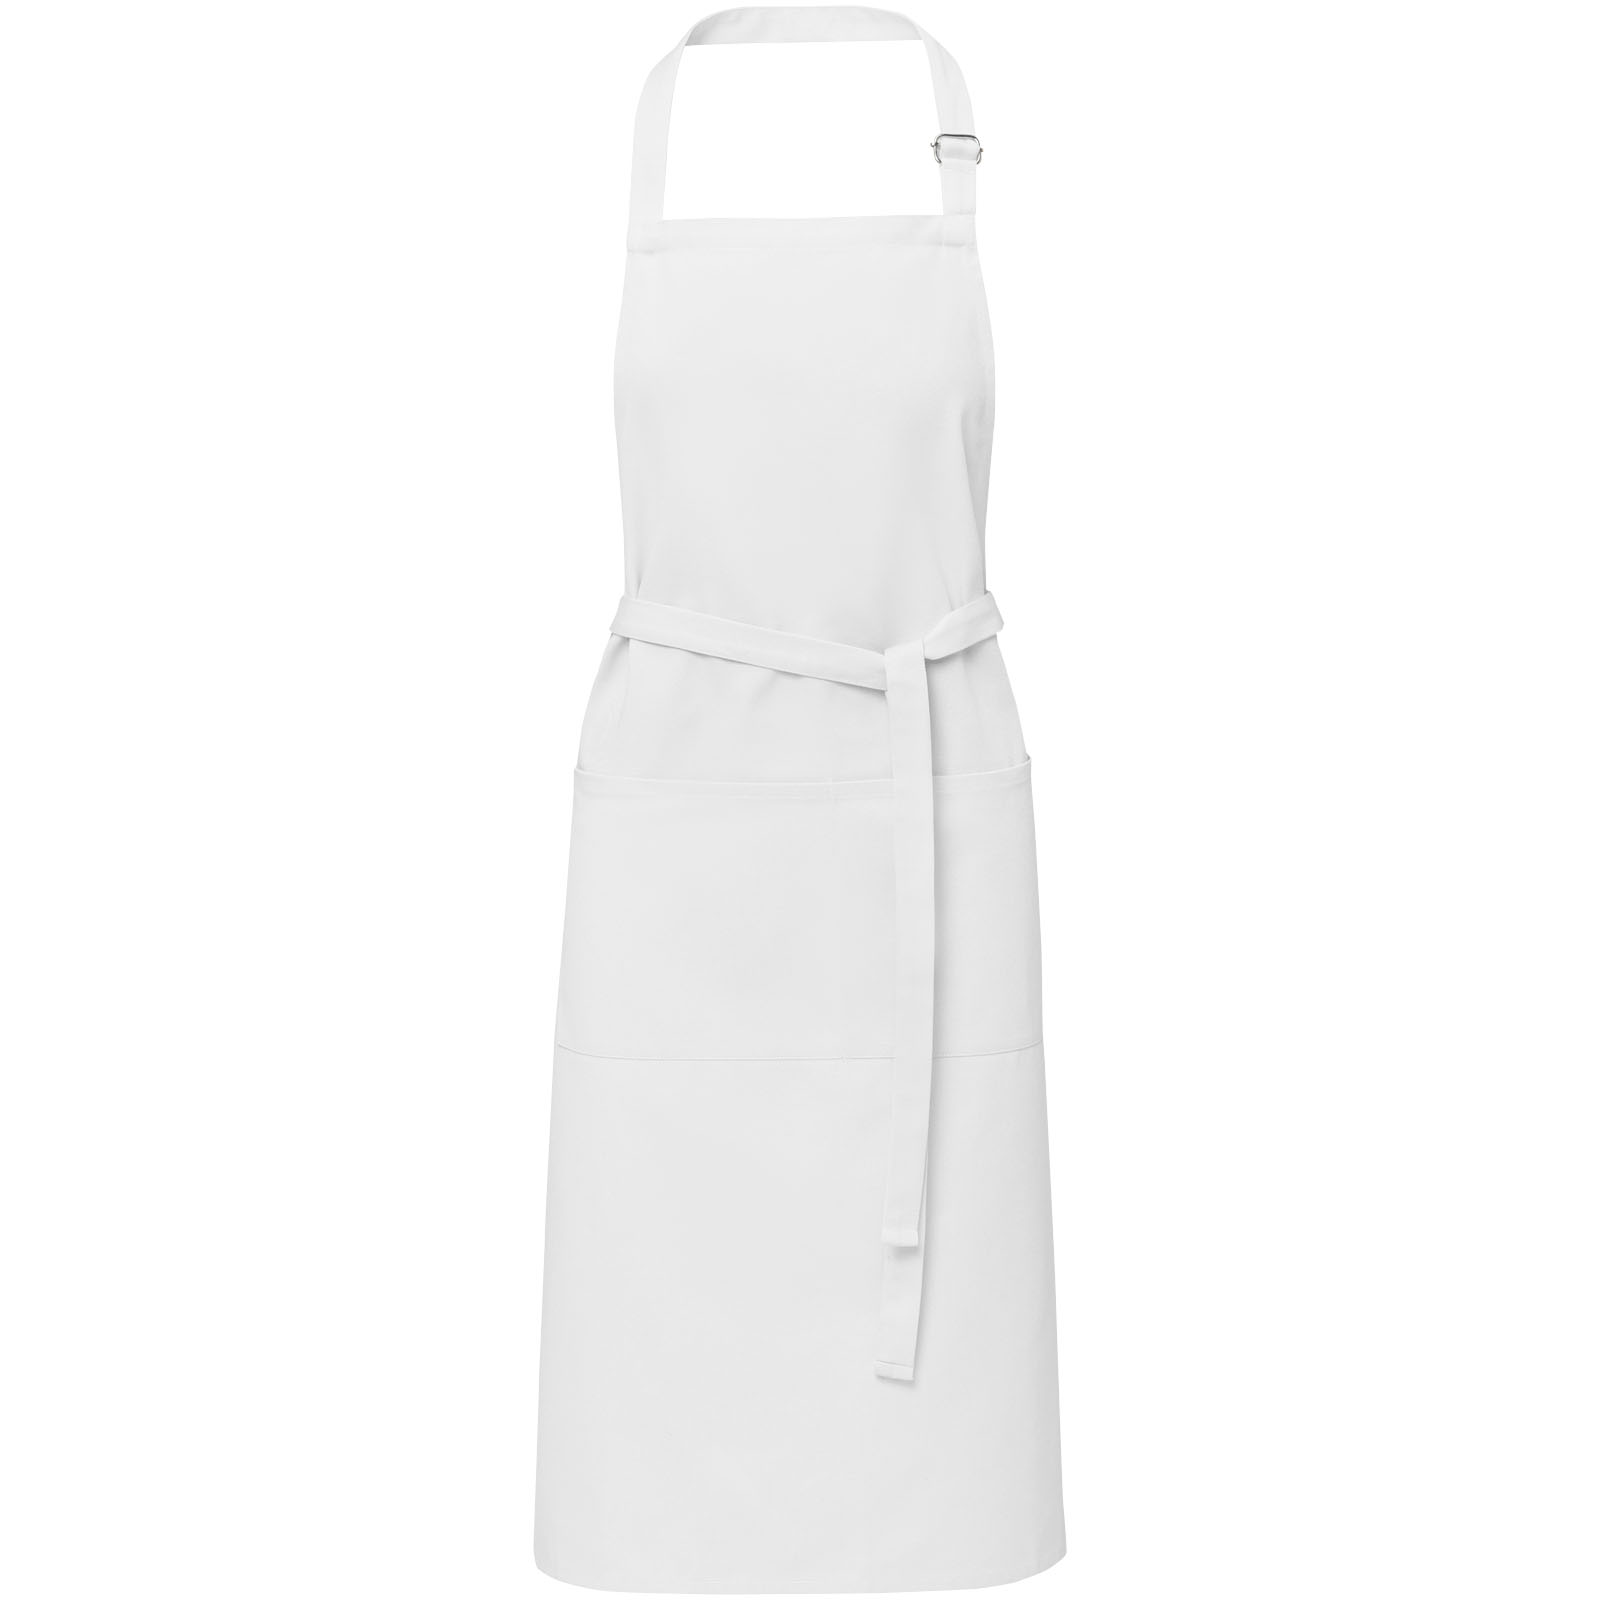 Advertising Aprons - Andrea 240 g/m² apron with adjustable neck strap - 0